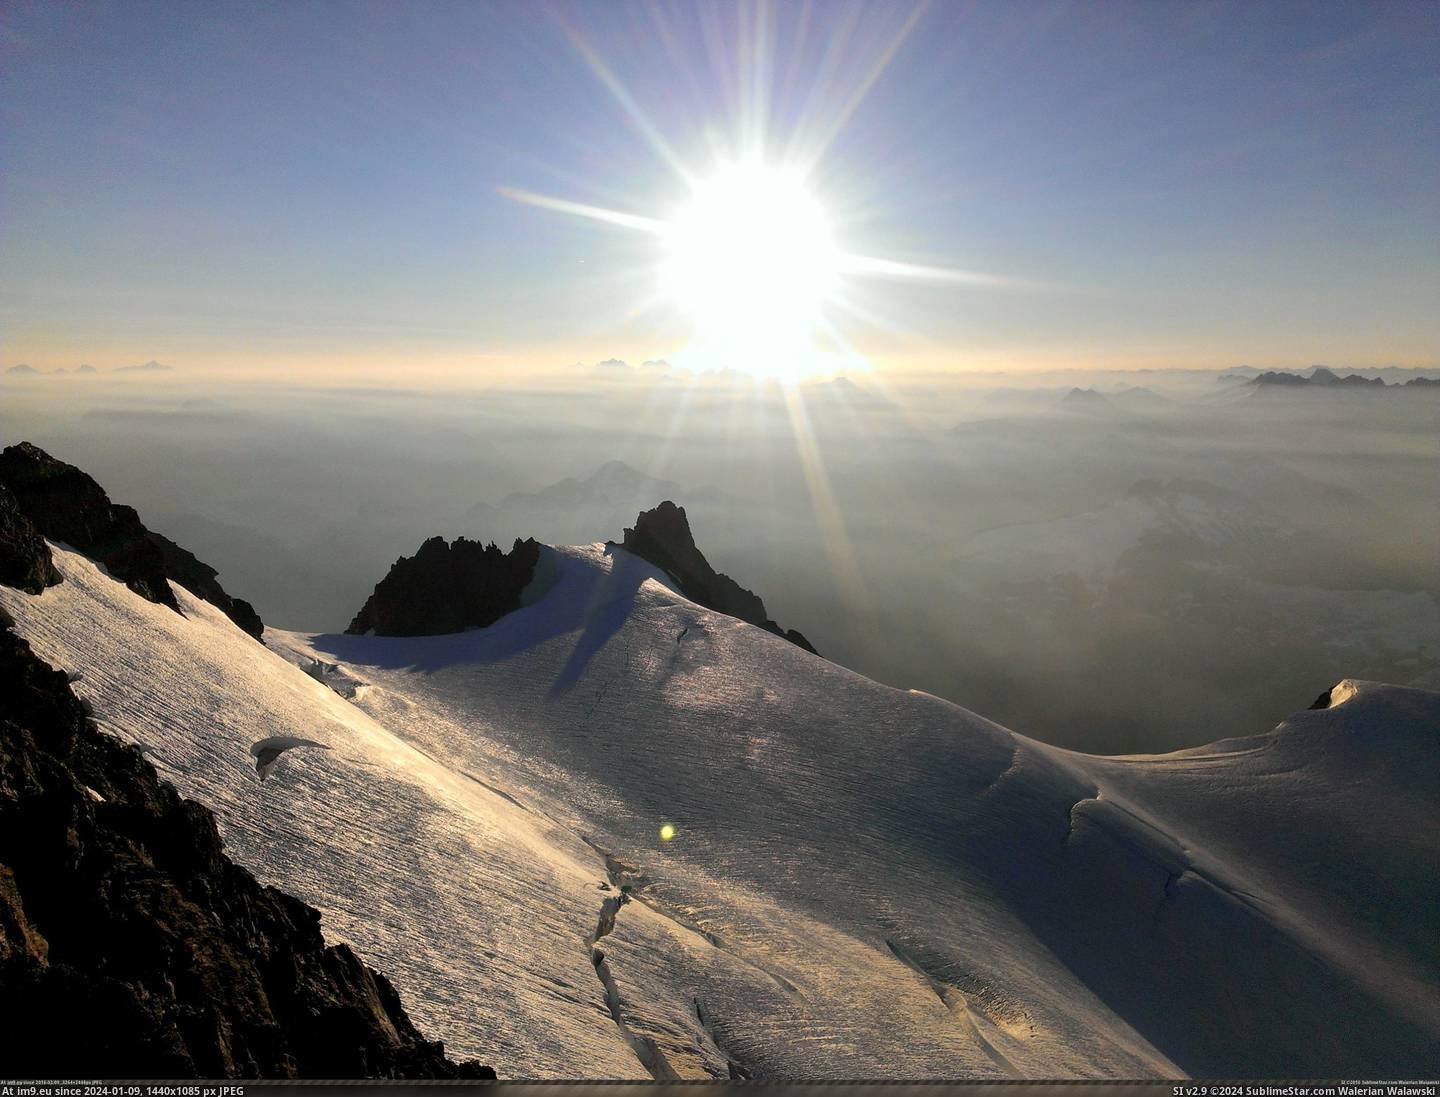 #3264x2448  #Summit [Earthporn] View from Mt. Shuksan summit block, July 2015 [3264x2448] Pic. (Изображение из альбом My r/EARTHPORN favs))